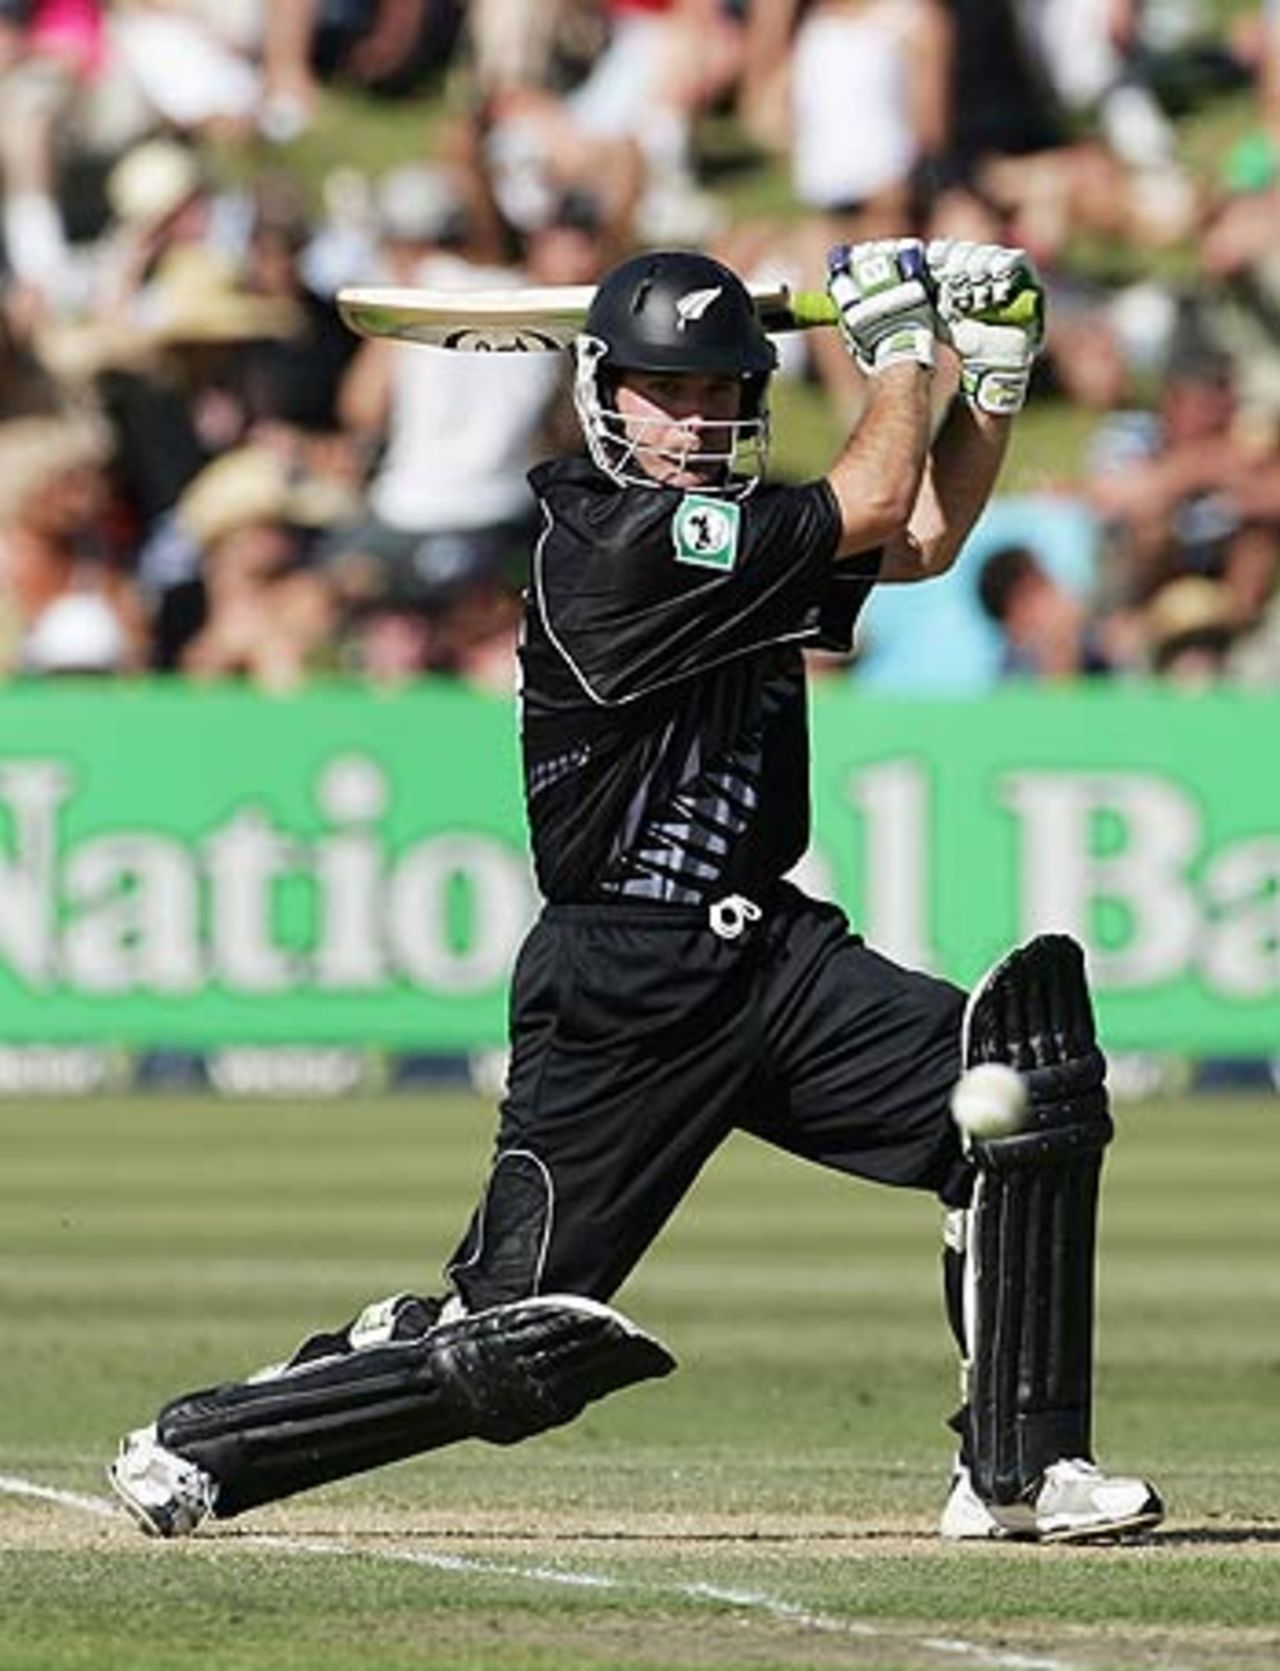 Jamie How drives during his innings of 58, New Zealand Sri Lanka, 1st ODI, Queenstown, December 31, 2005